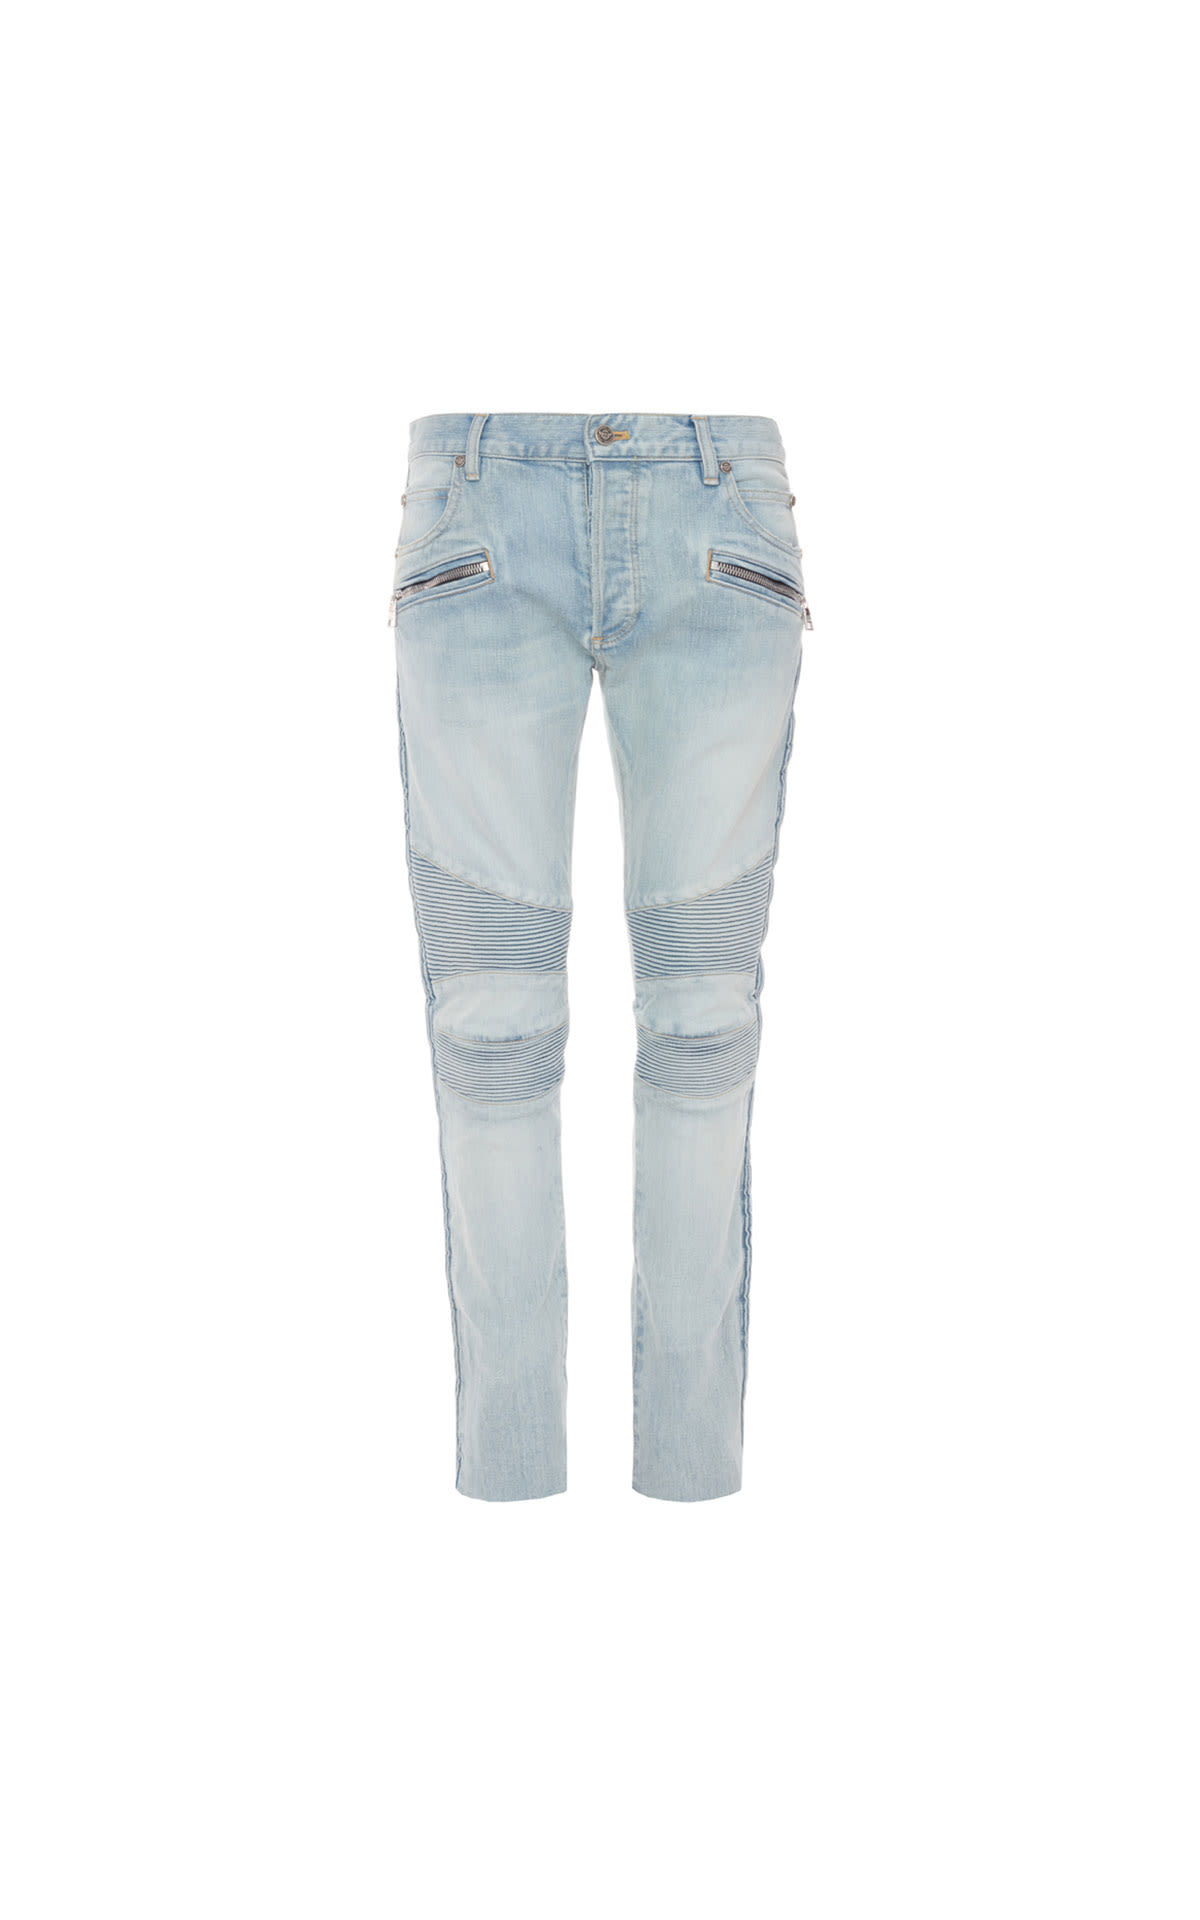 Balmain  Jeans  from Bicester Village